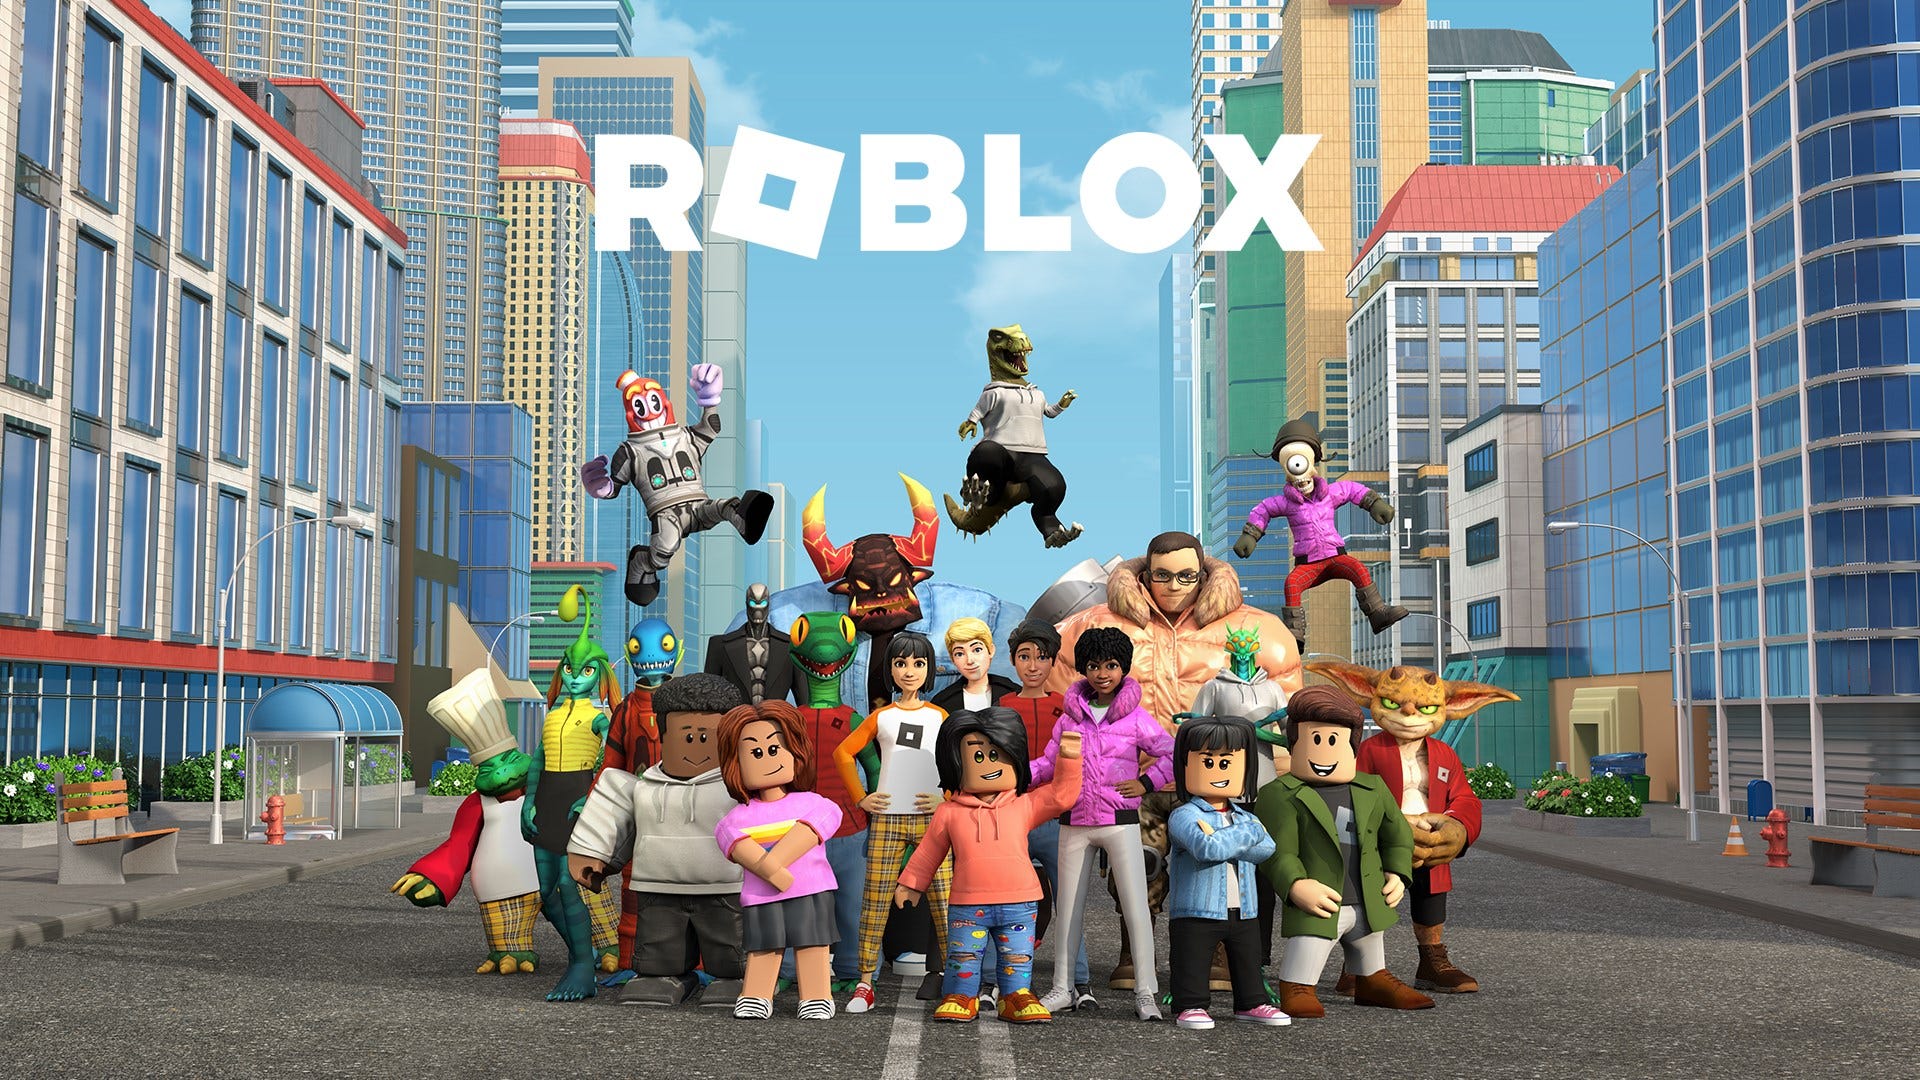 Roblox has no business in being acquired by Disney